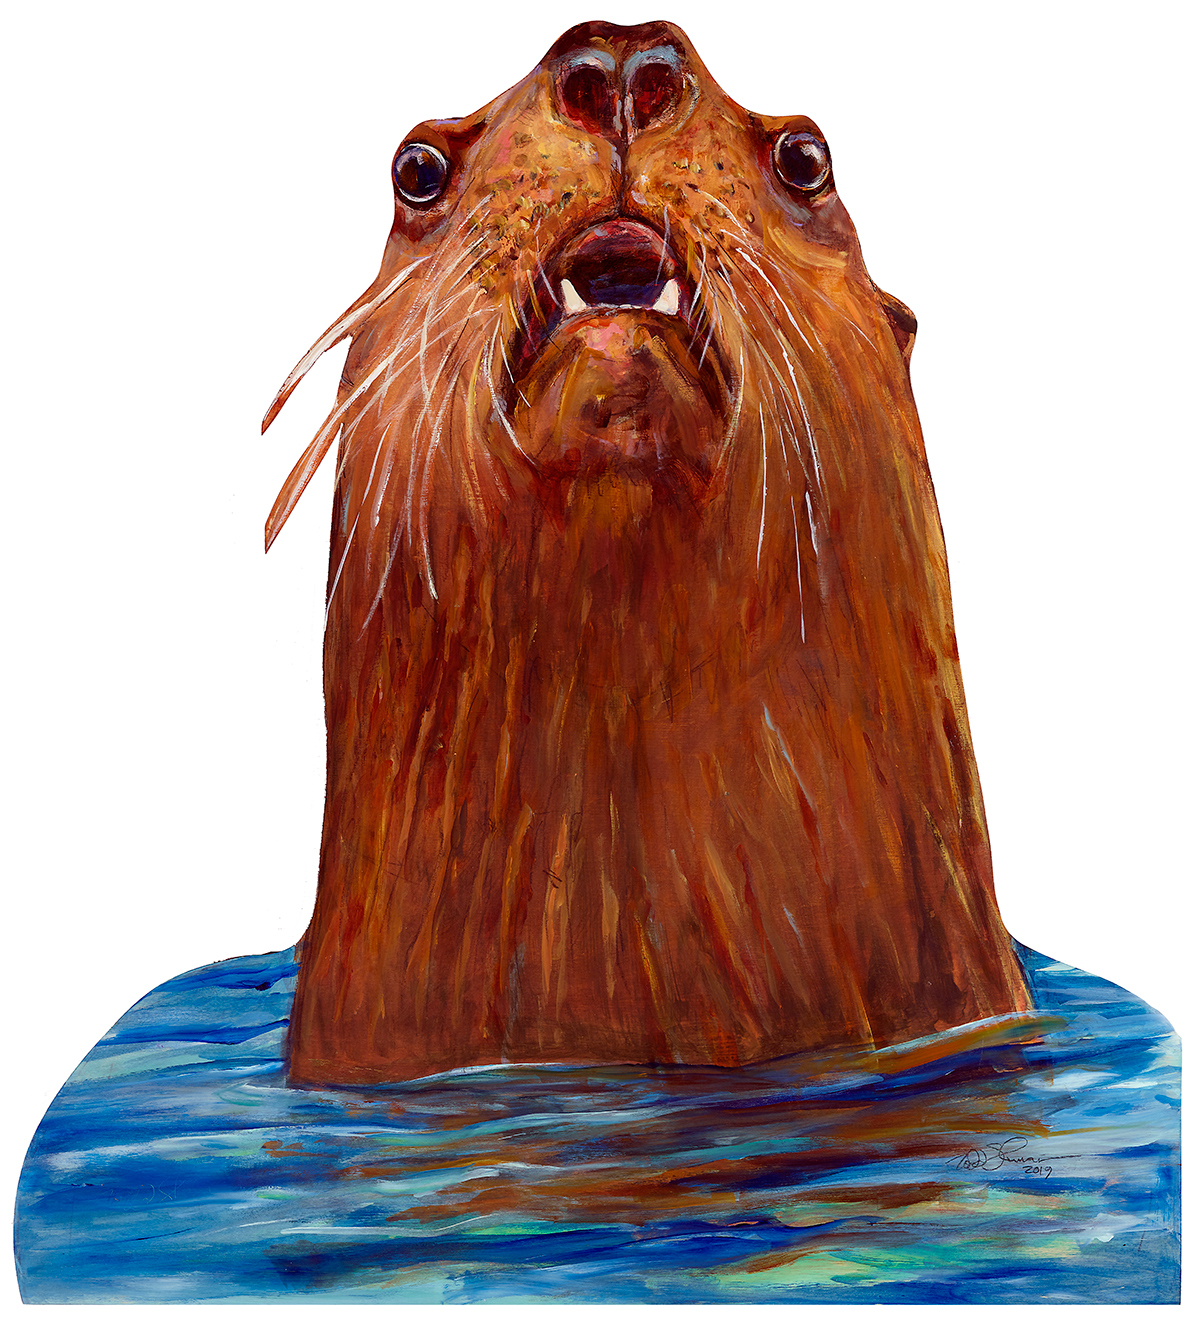 Artist's drawing of a Stellar sea lion bull's head emerging from blue water.